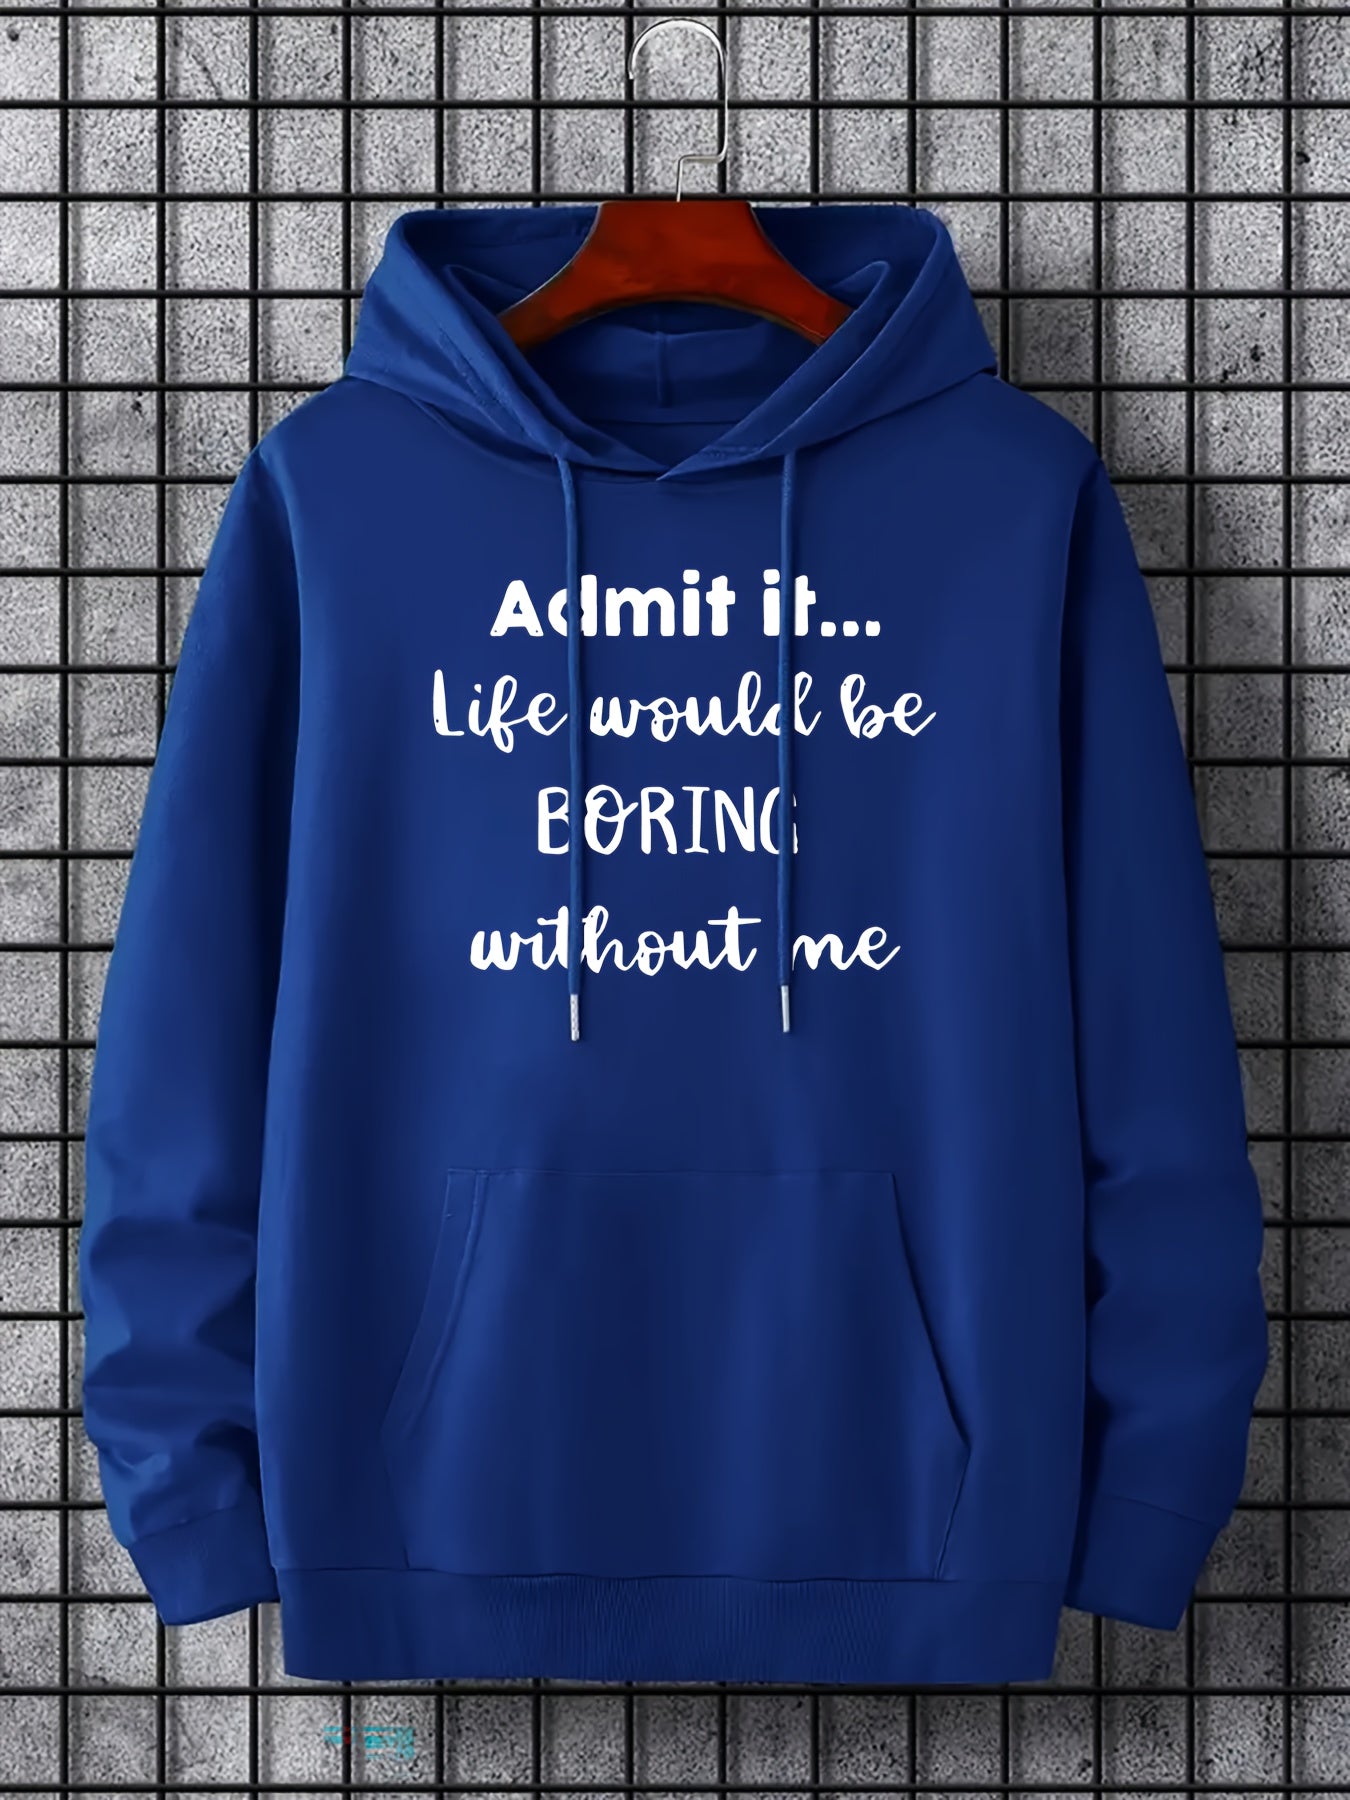 Funny Admit It Print Hoodie, Cool Novel Hoodies For Men, Men's Casual Graphic Design Pullover Hooded Sweatshirt With Kangaroo Pocket Streetwear For Winter Fall, As Gifts